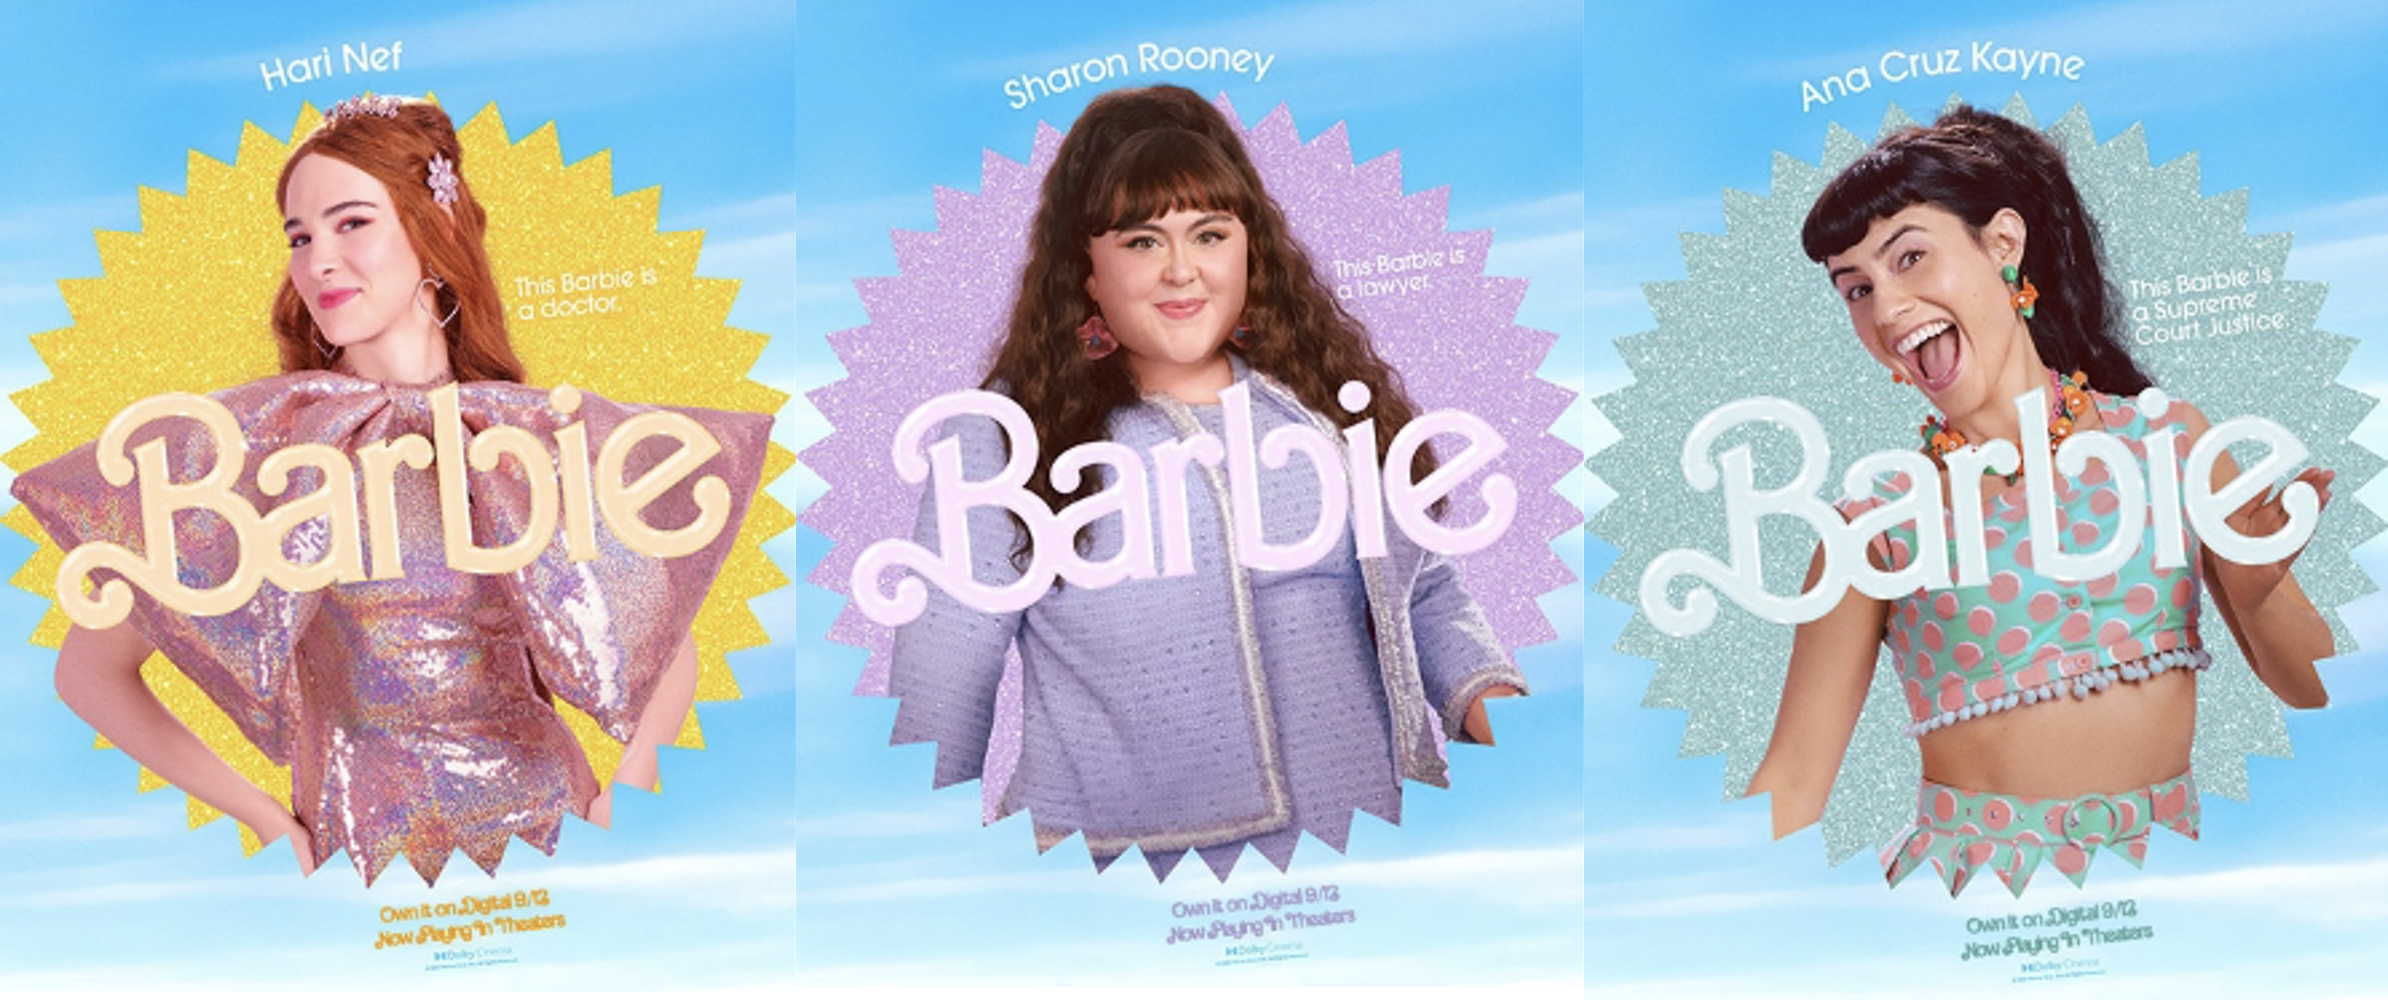 Three character posters featuring Doctor Barbie, Lawyer Barbie, and Supreme Court Justice Barbie respectively